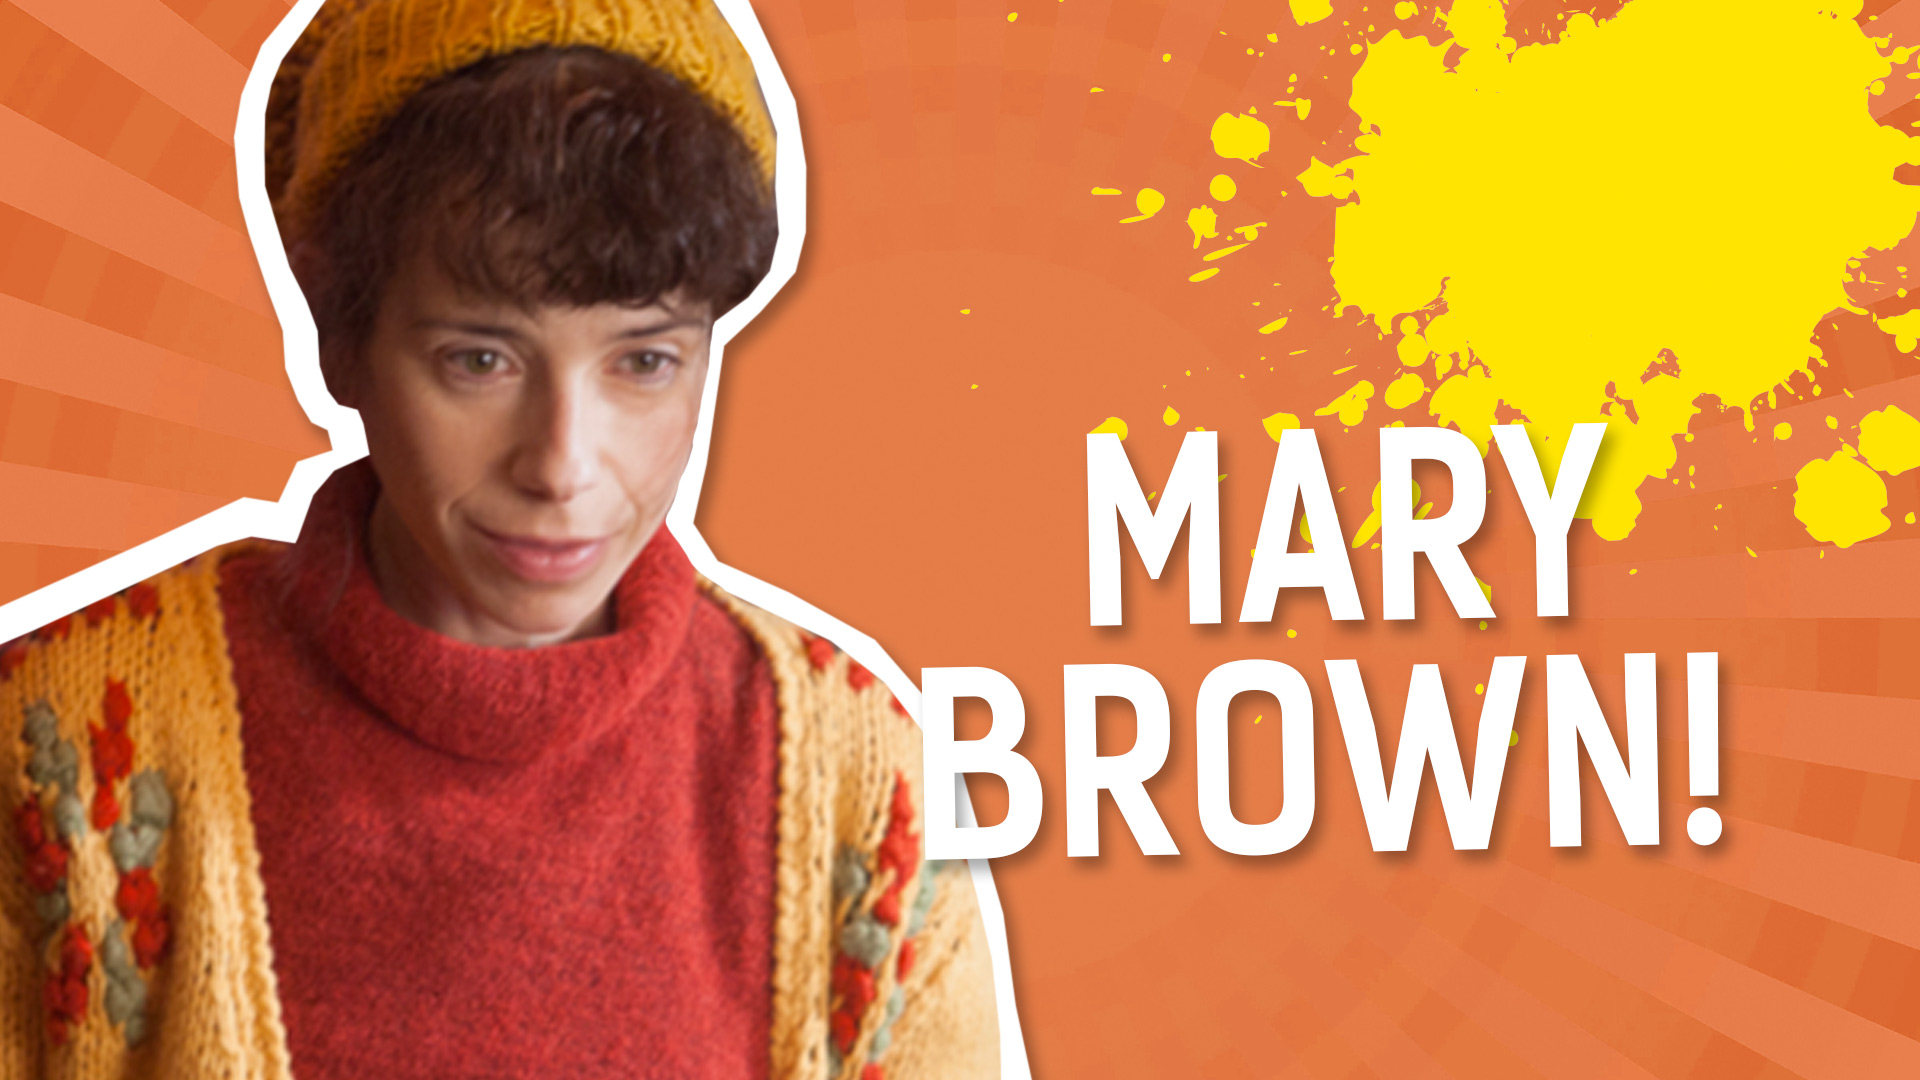 Result: Mary Brown